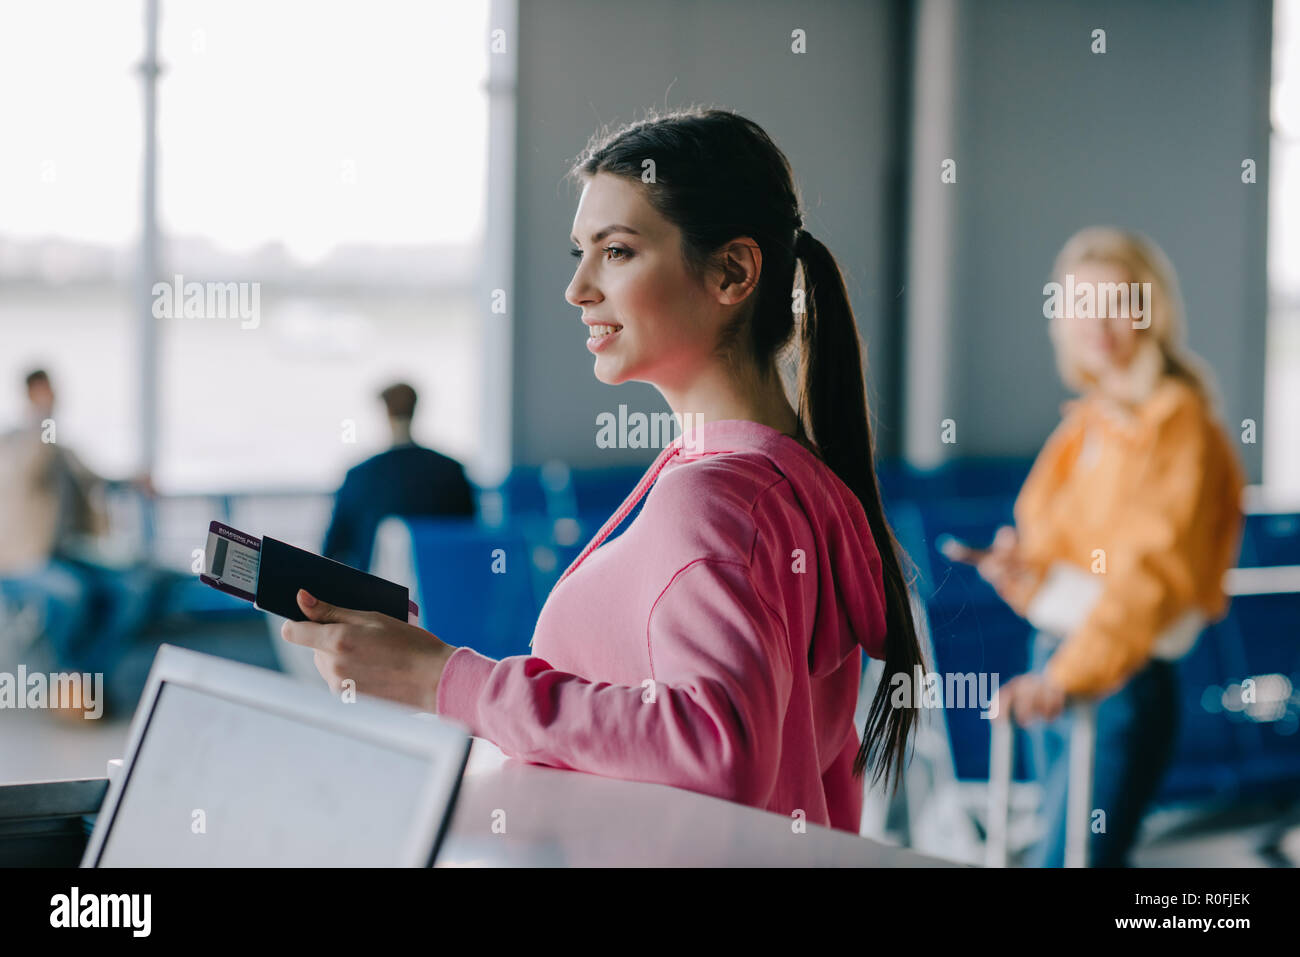 smiling young woman holding passport and boarding pass in airport terminal Stock Photo